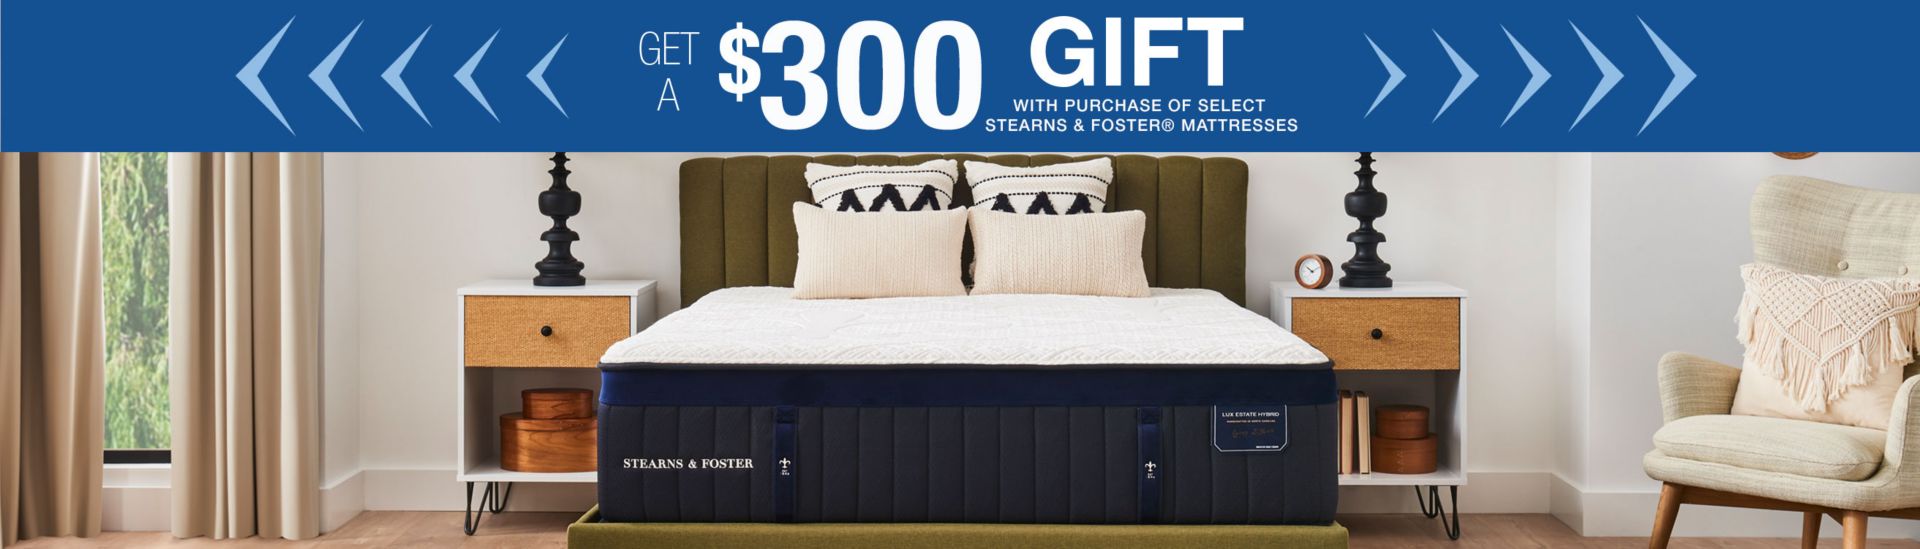 Get A $300 Gift With a Purchase of any New Stearns & Foster Mattress